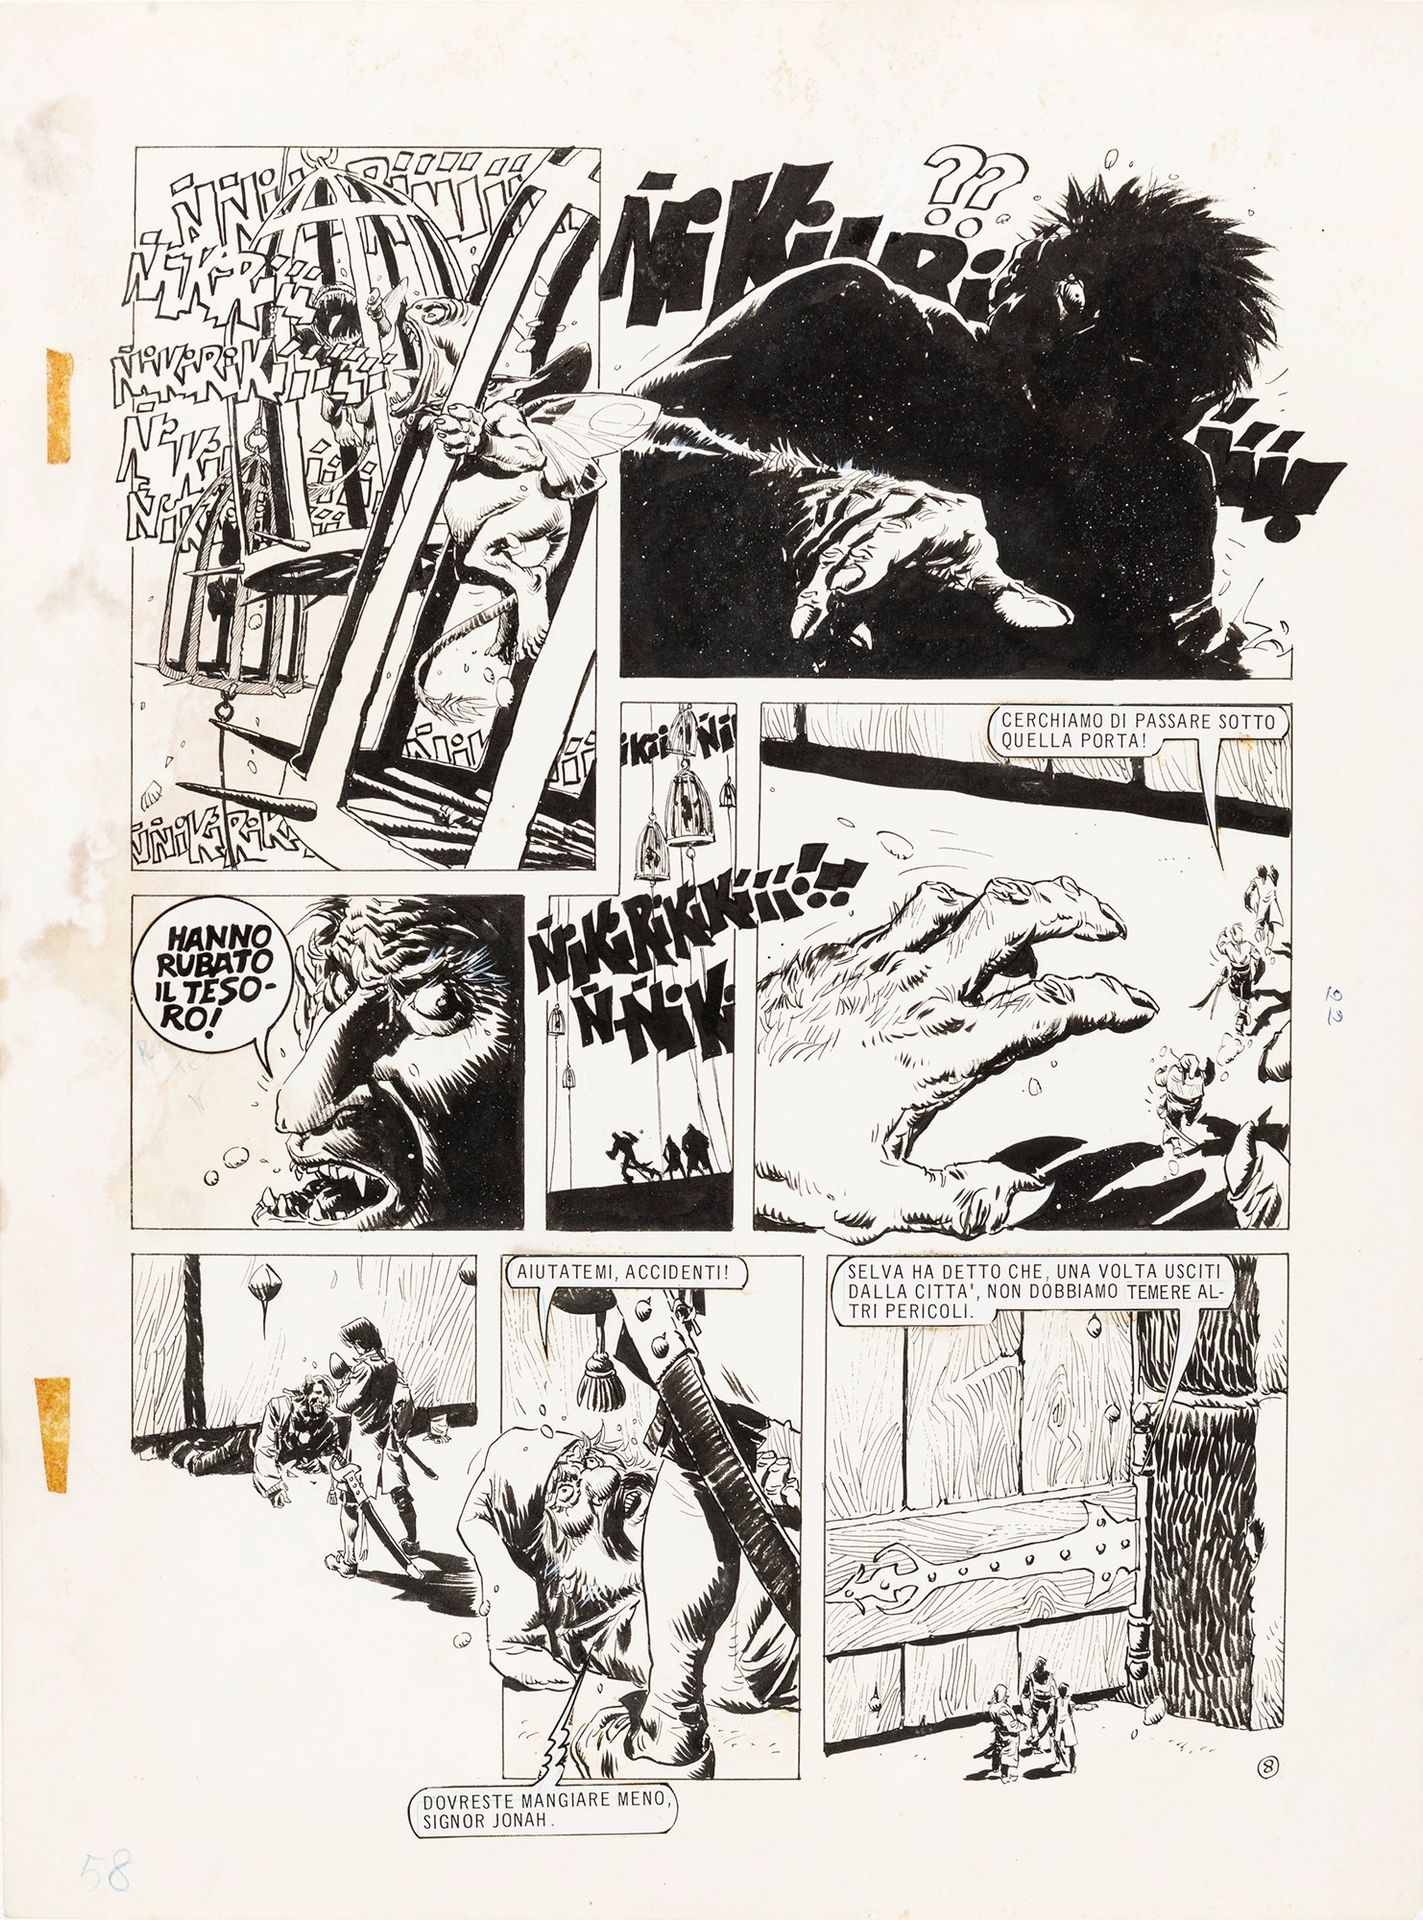 Enrique BRECCIA Robin of the stars - A children's tale, 1978

pencil and ink on &hellip;